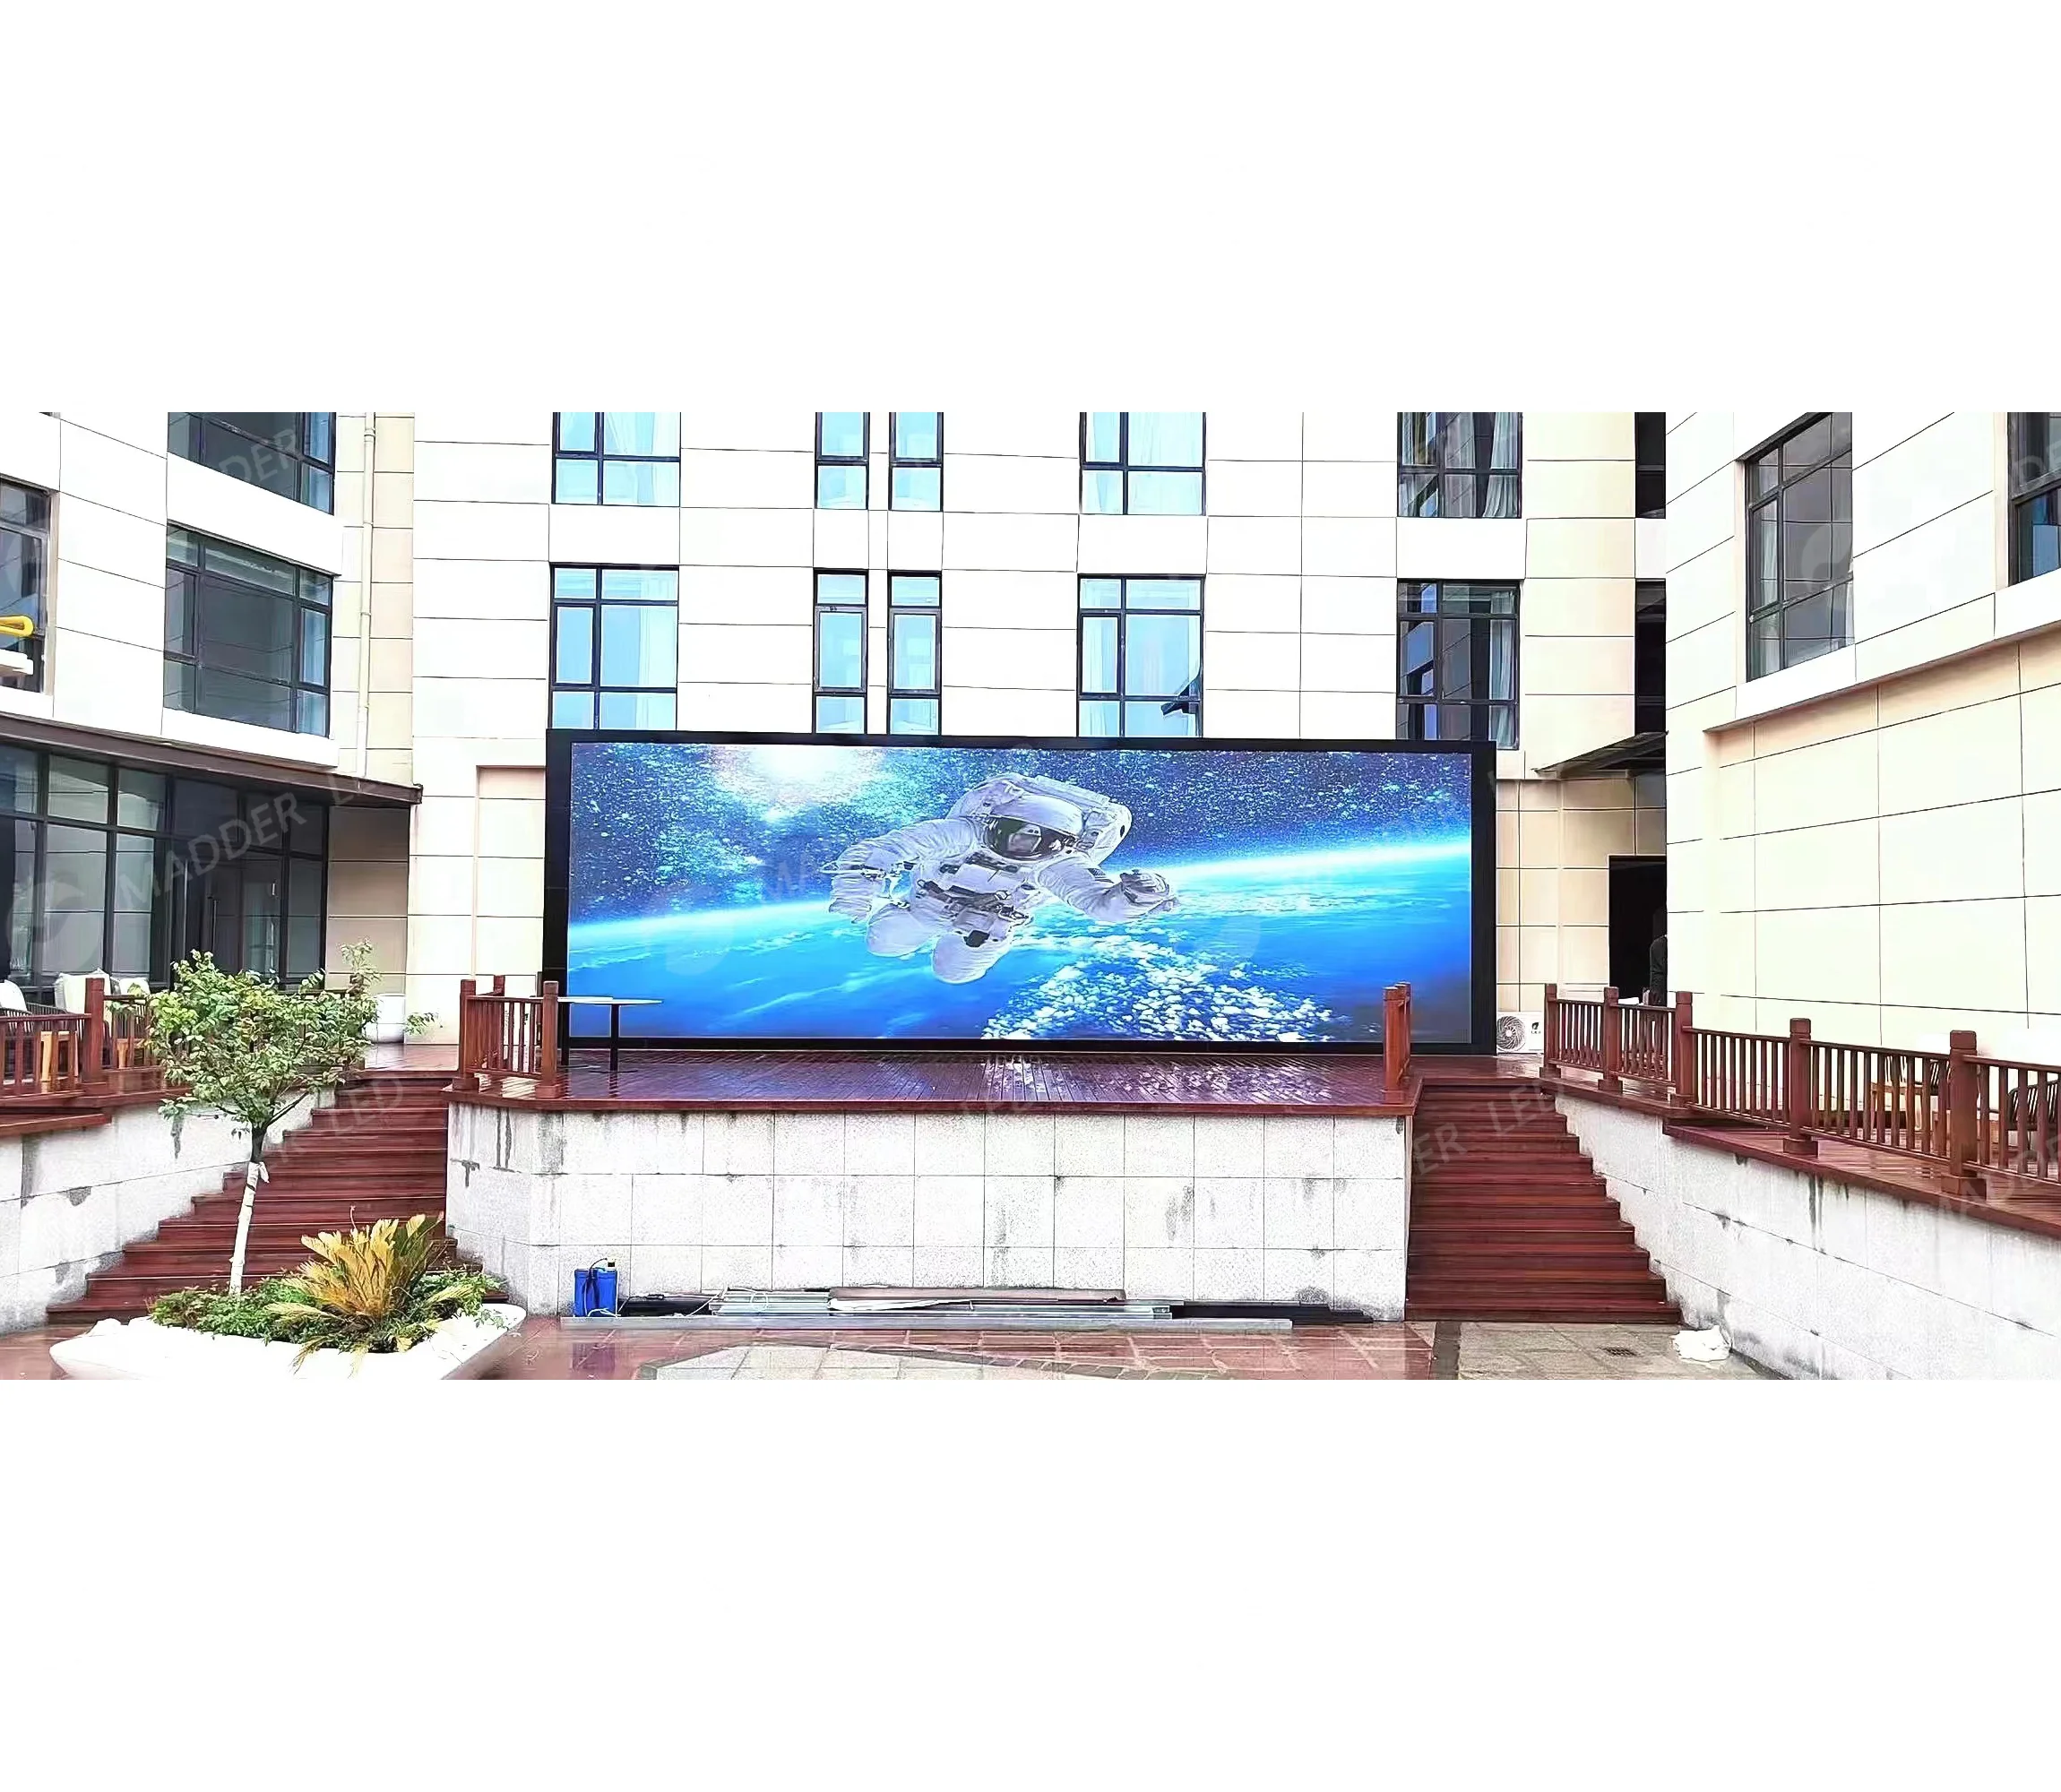 P3 P6 P8 Front and Rear Service Digital Outdoor Fixed Led Quotation Display Billboards Signs BoardsSignage Advertising Screen